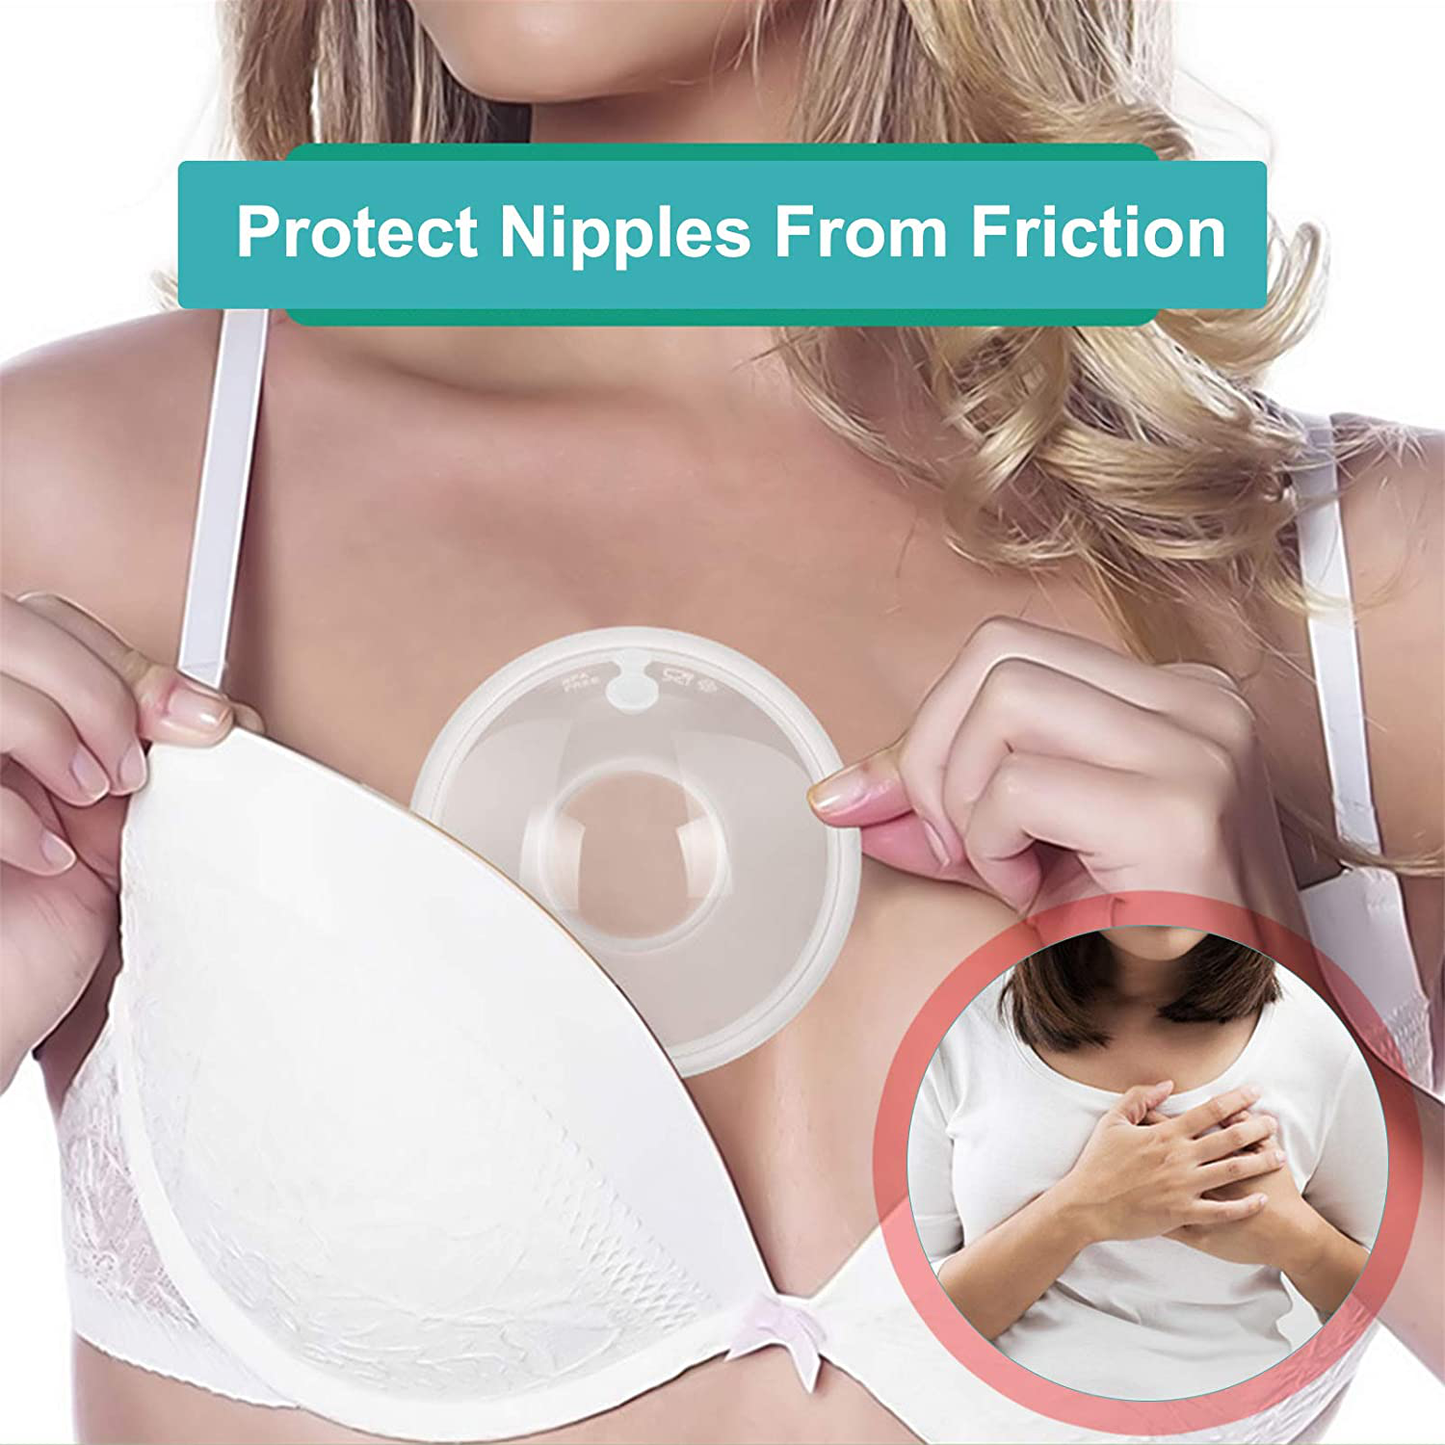 Breast Shells, Milk Catcher, (2PCS) Breastmilk Collector, Milk Savers for Breastfeeding, Nipple Shields with Plug, for Milk Leaks, Collect Breastmilk, Protect Cracked Nipple, Reusable & BPA-Free